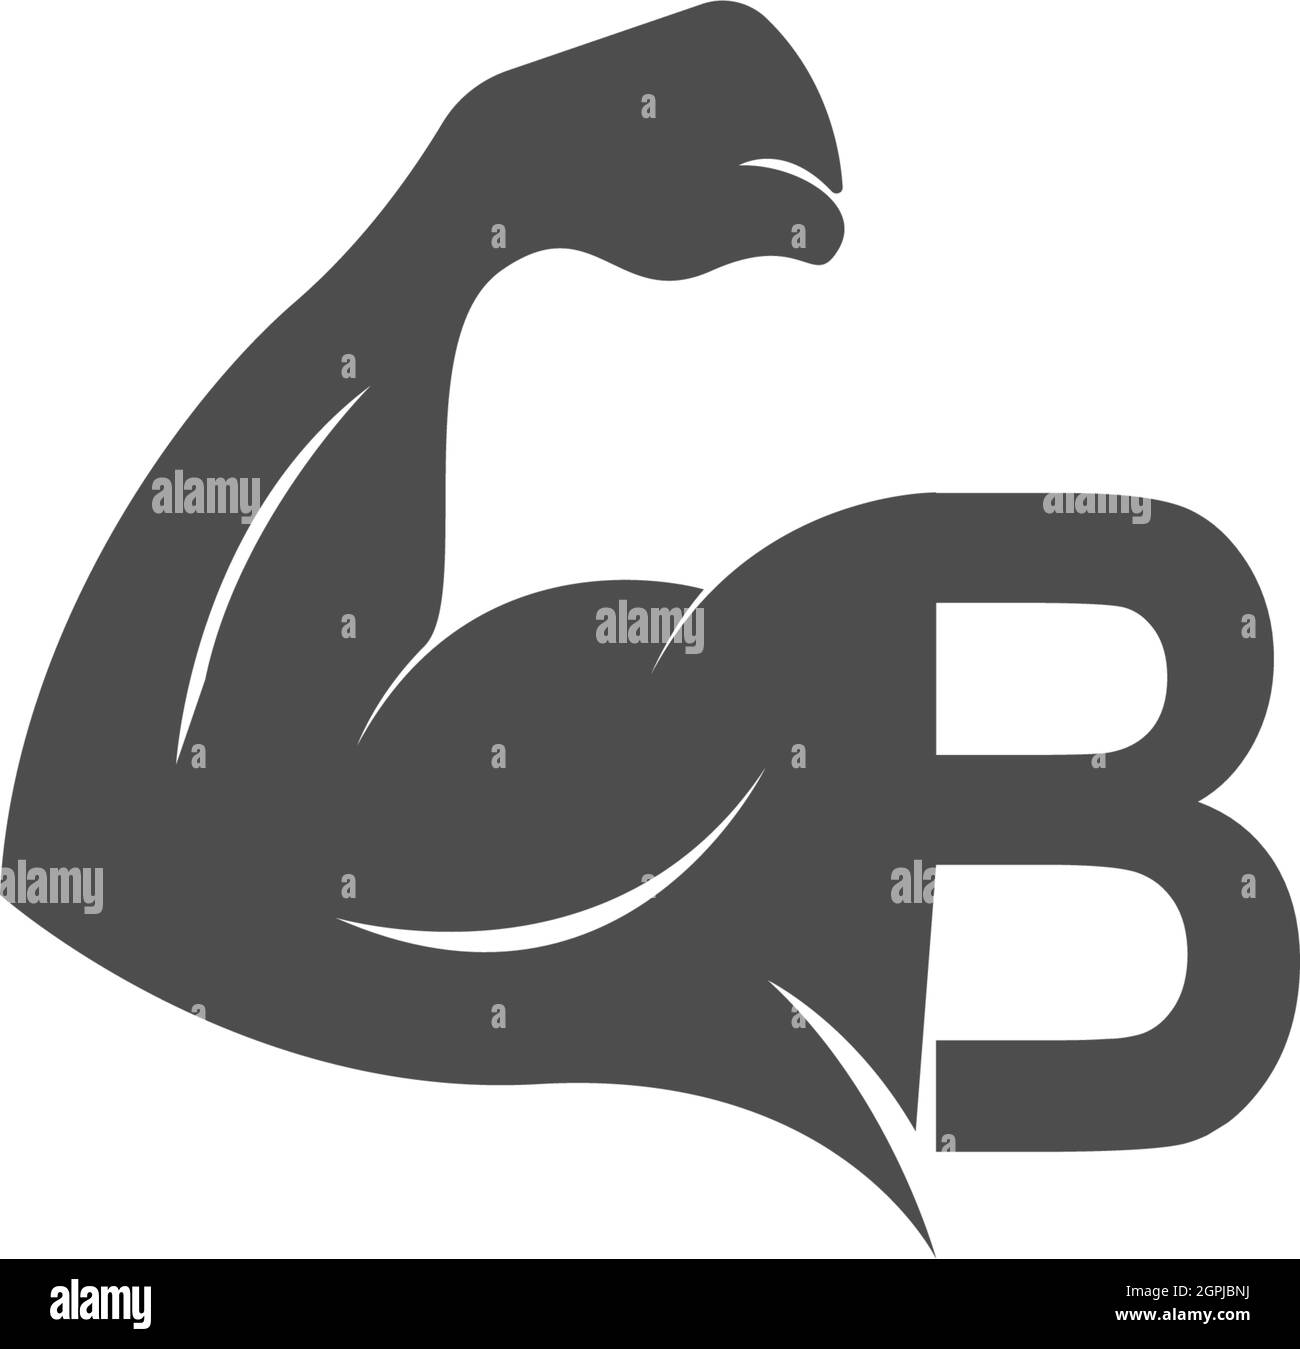 Letter B logo icon with muscle arm design vector Stock Vector